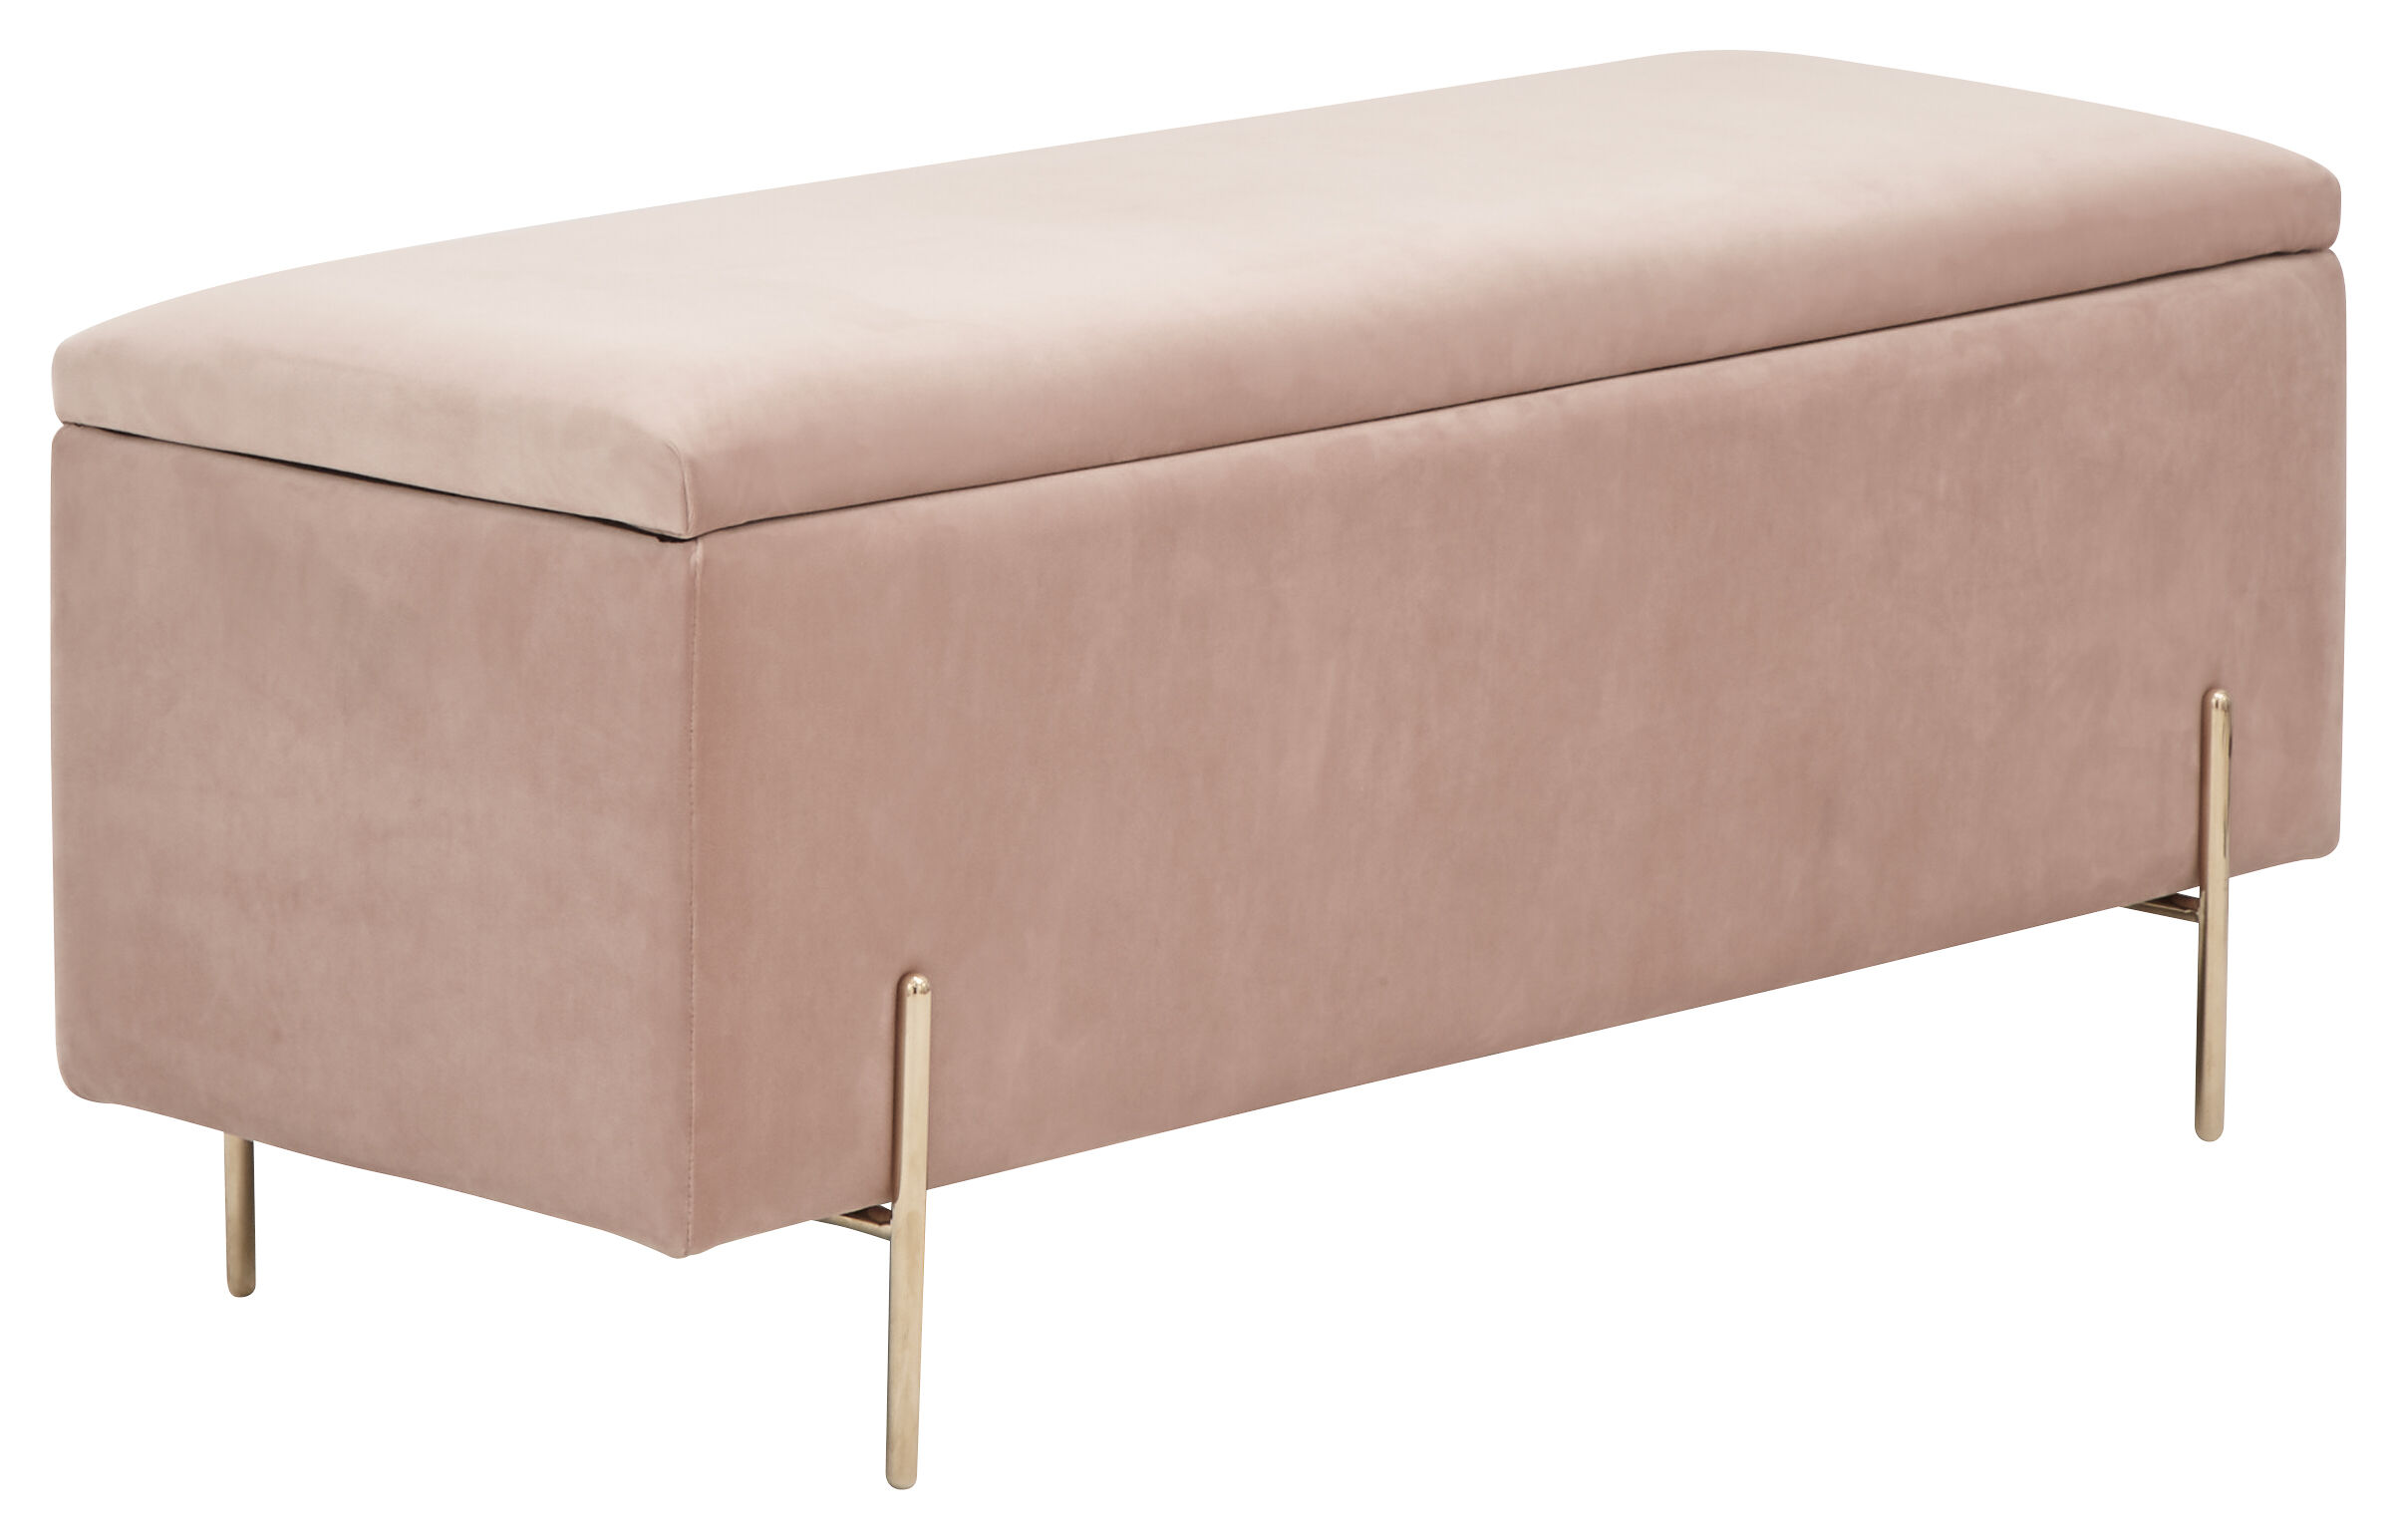 Deluxe Storage & Seating Miley Ottoman Storage Bench   Blush Pink   Self Assembly